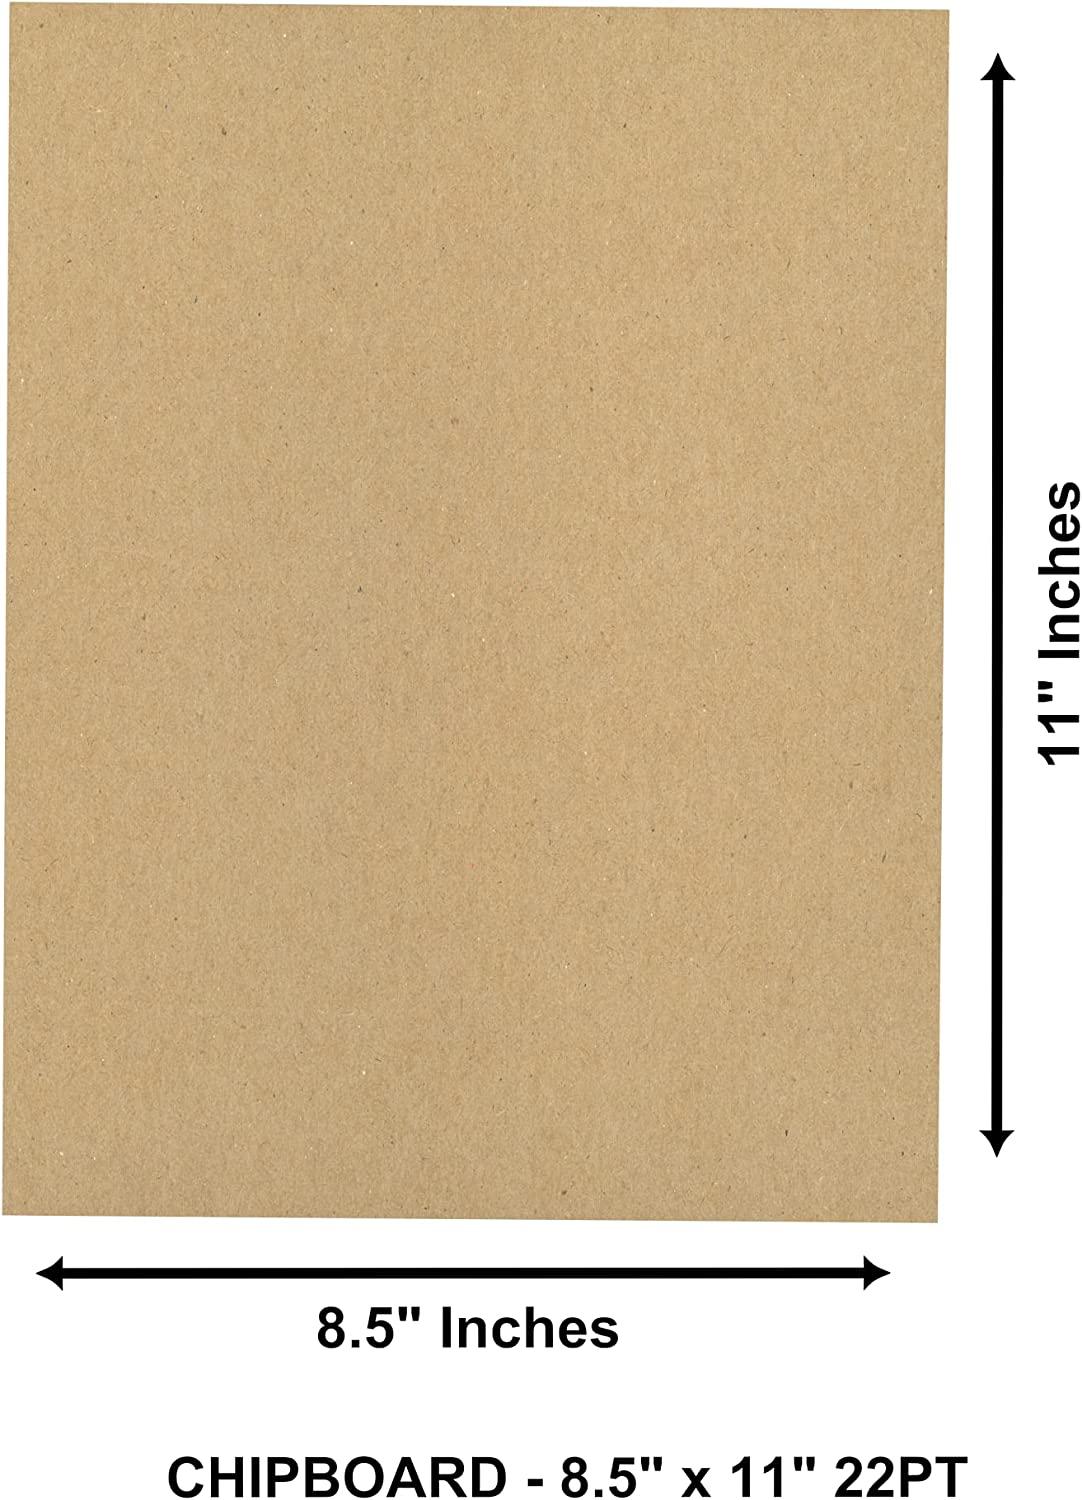 Chipboard Sheets 8.5 X 11 - 100 Sheets of 22 Point Chip Board for Crafts  - Thi